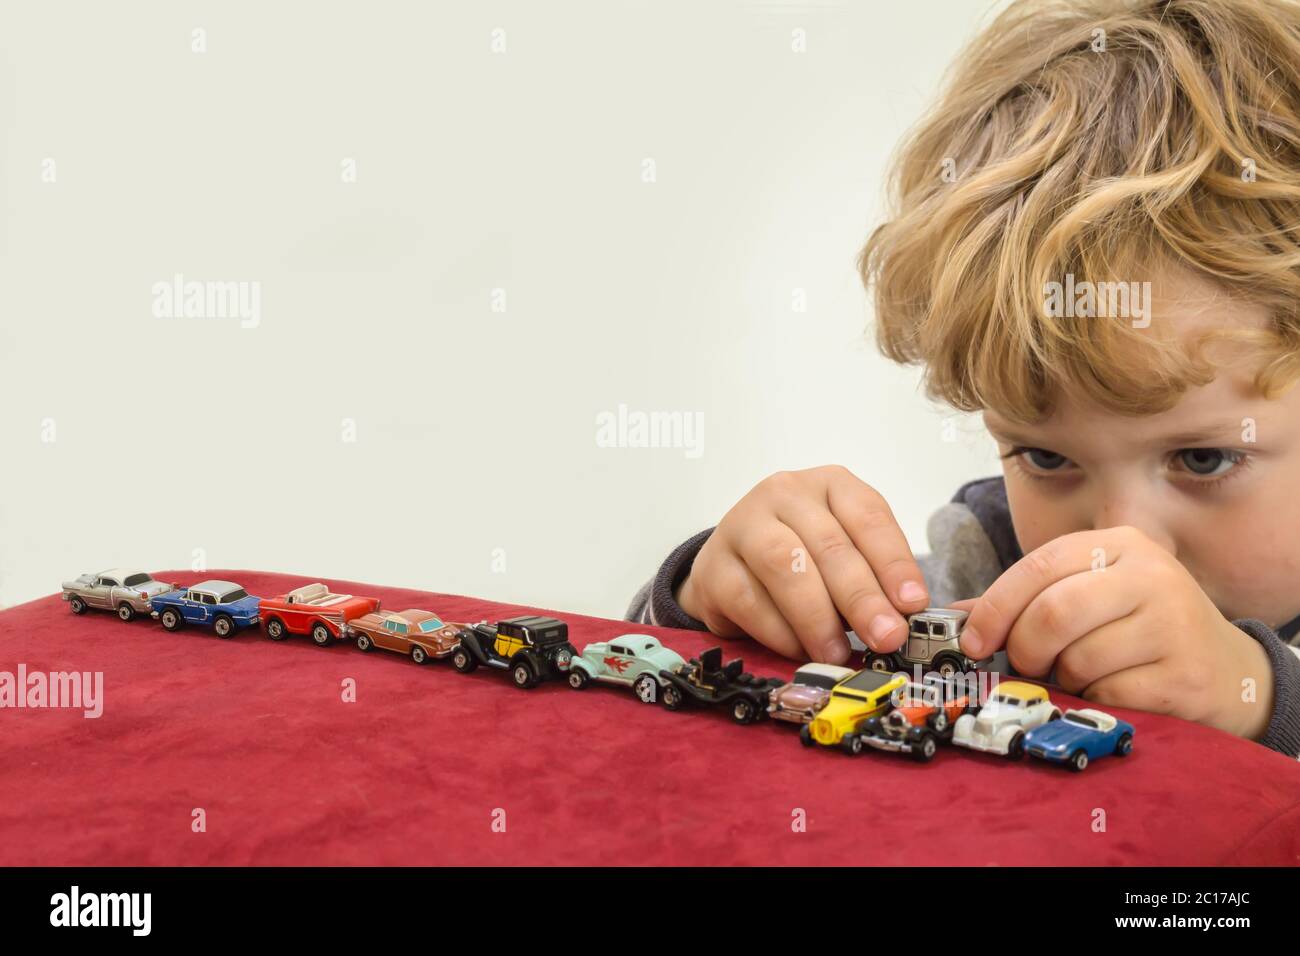 QUEENSTOWN, SOUTH AFRICA - MAY 17 2015 - Little blonde boy playing with vintage toy cars on red velv Stock Photo